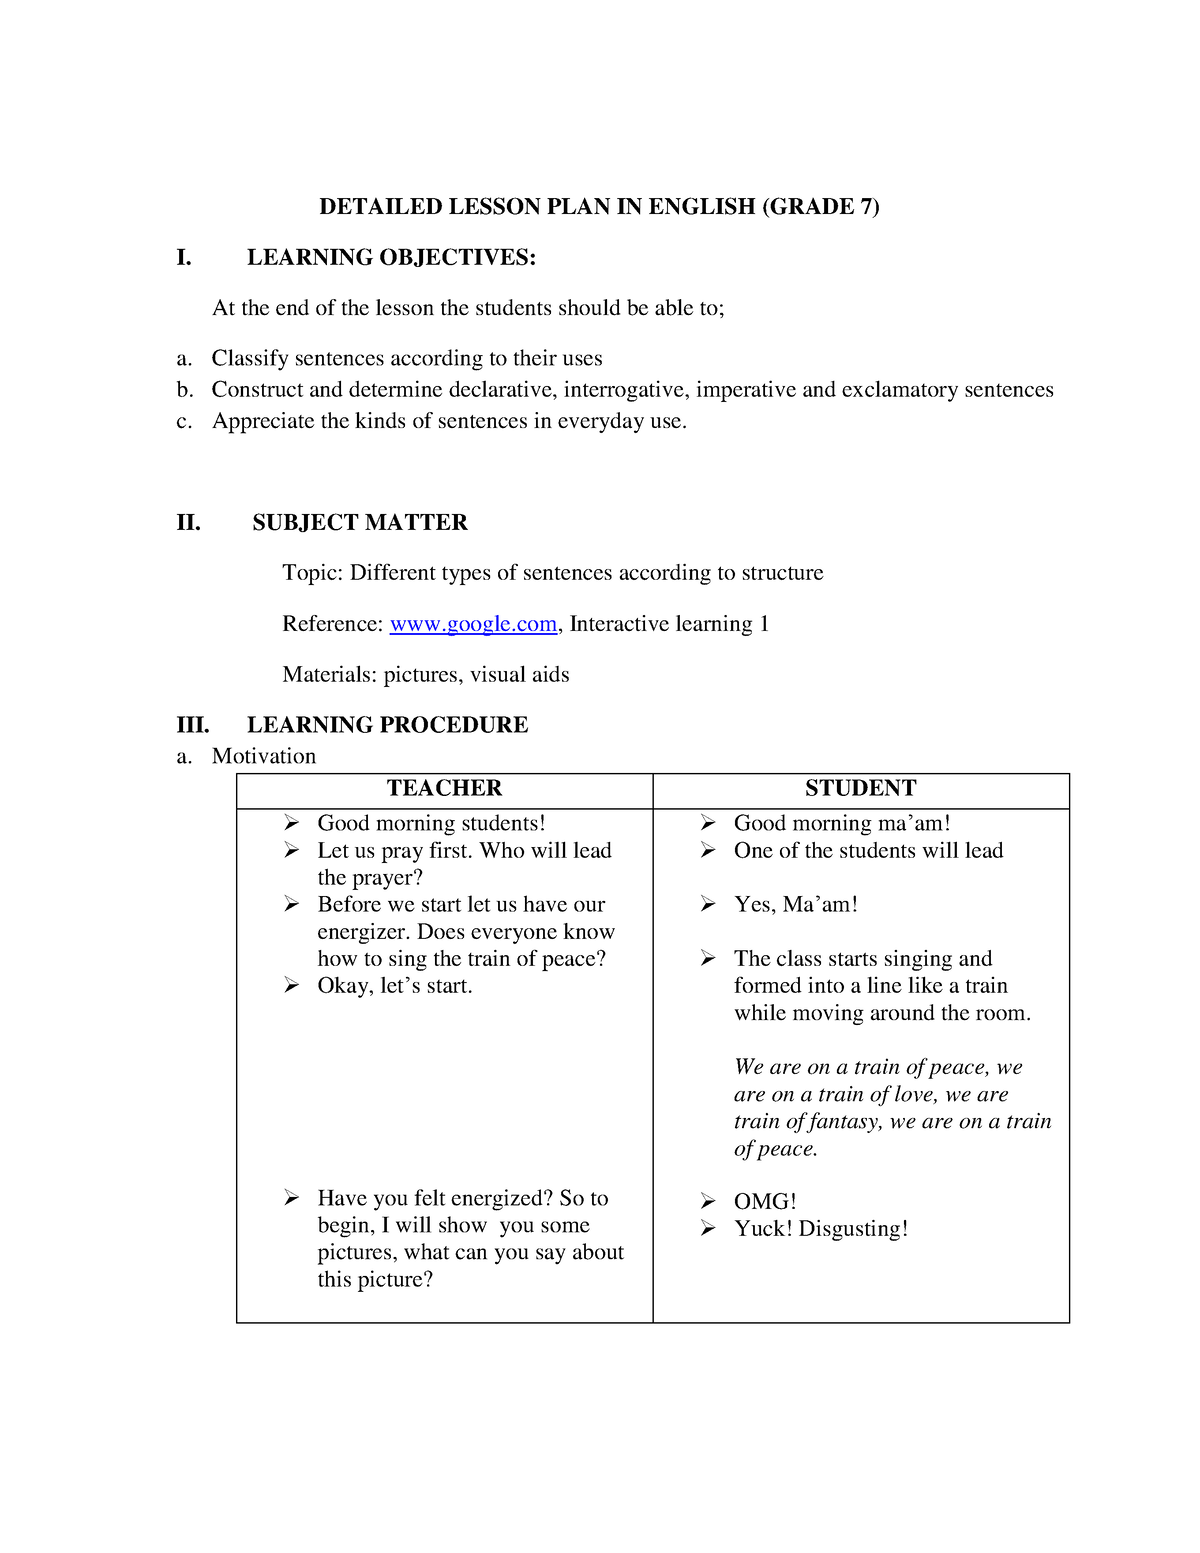 detailed-lesson-plan-in-english-grade-7-lesson-plan-for-grade-7-images